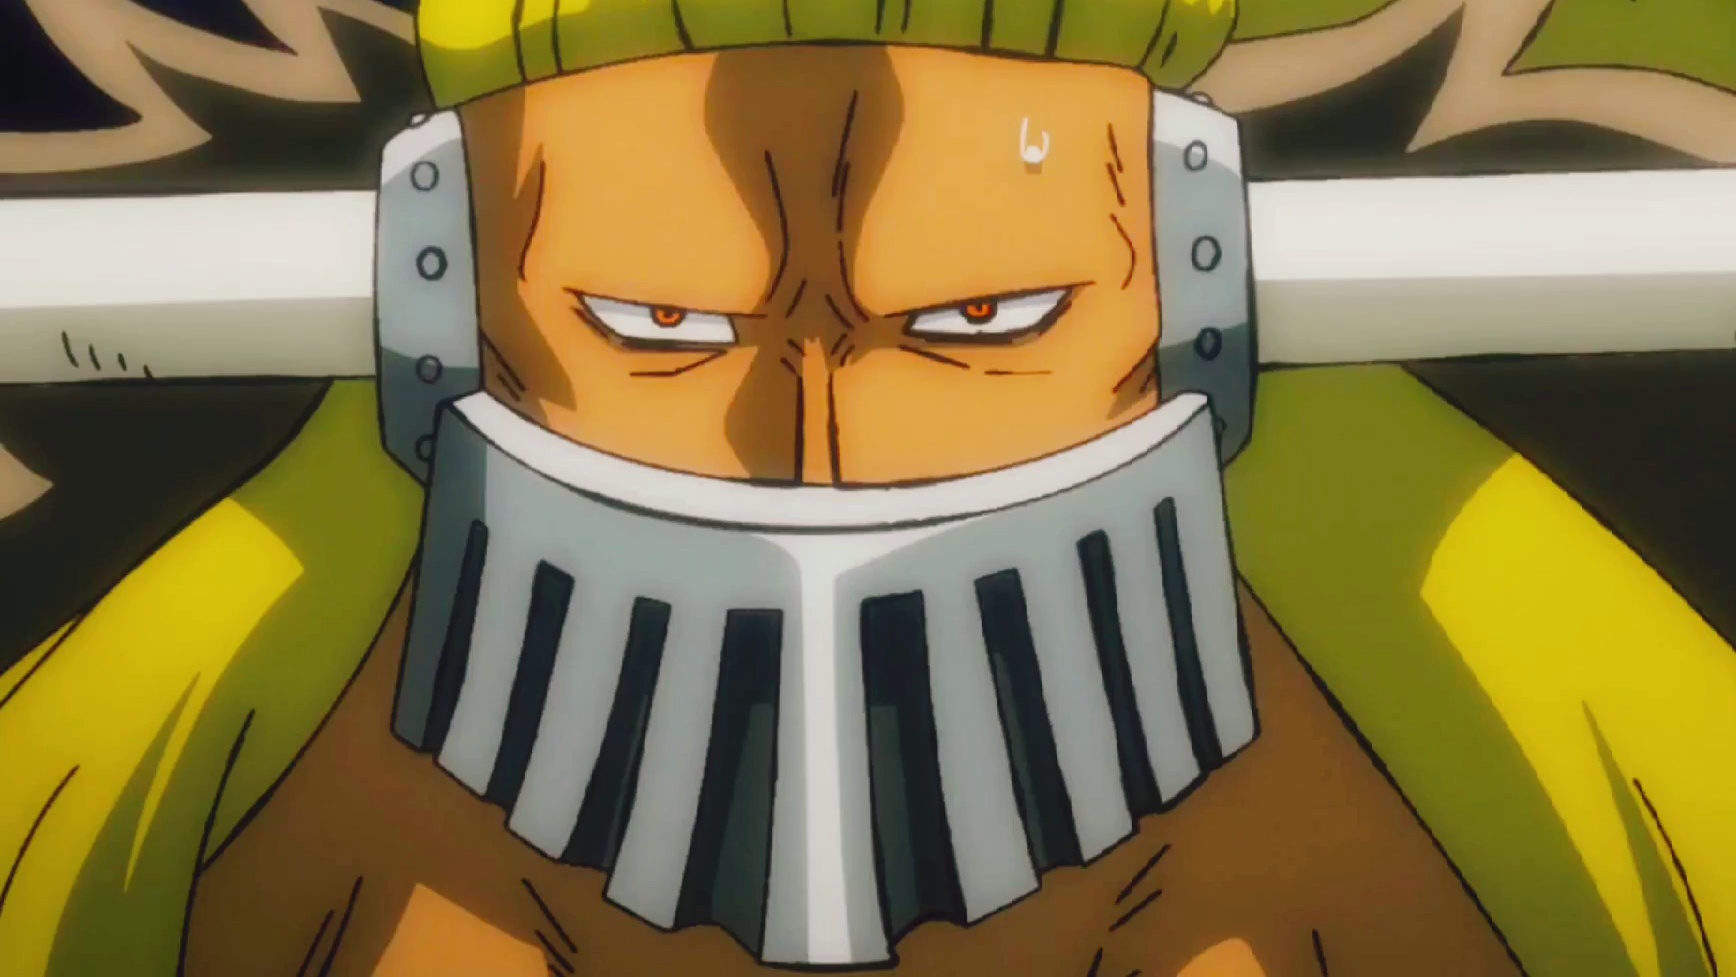 King 》  Anime king, One piece anime, One piece images